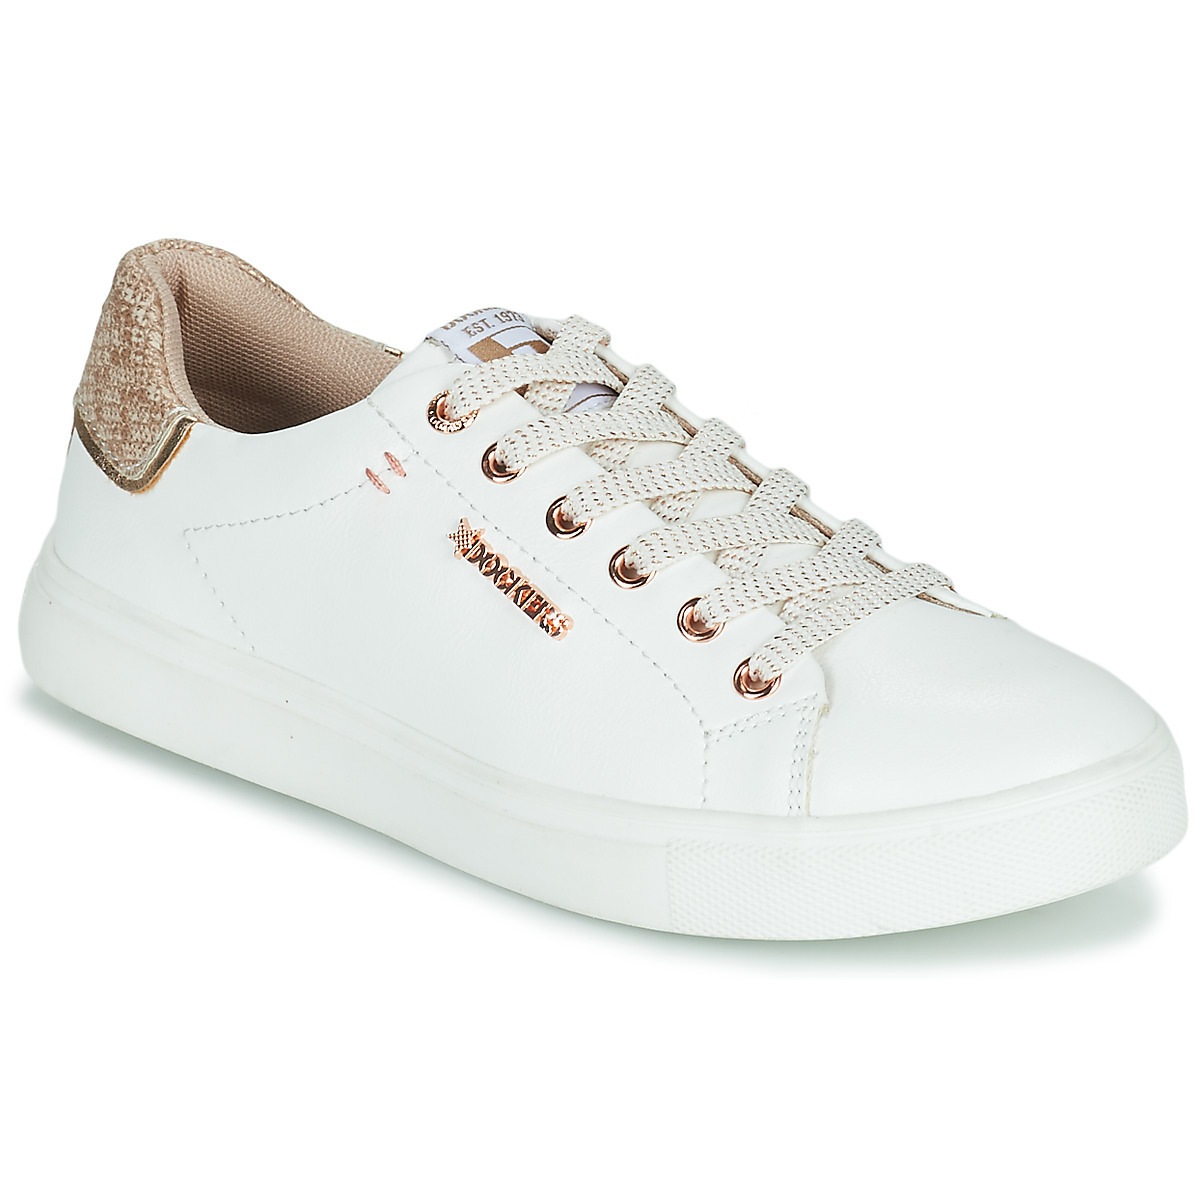 Dockers Sneakers in White for Women from Spartoo GOOFASH